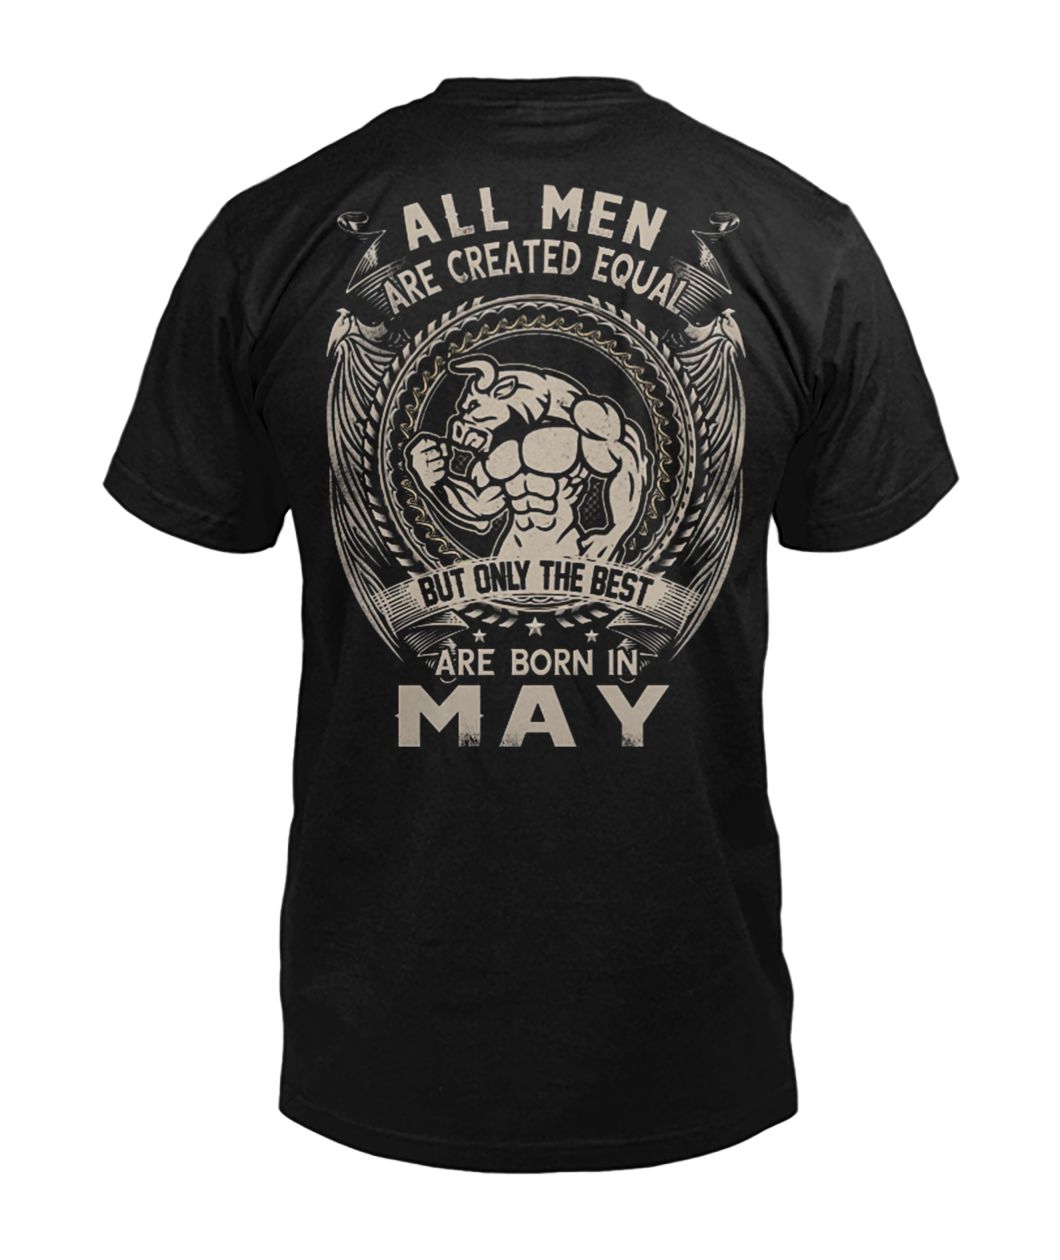 All men are created equal but only the best are born in may mens v-neck